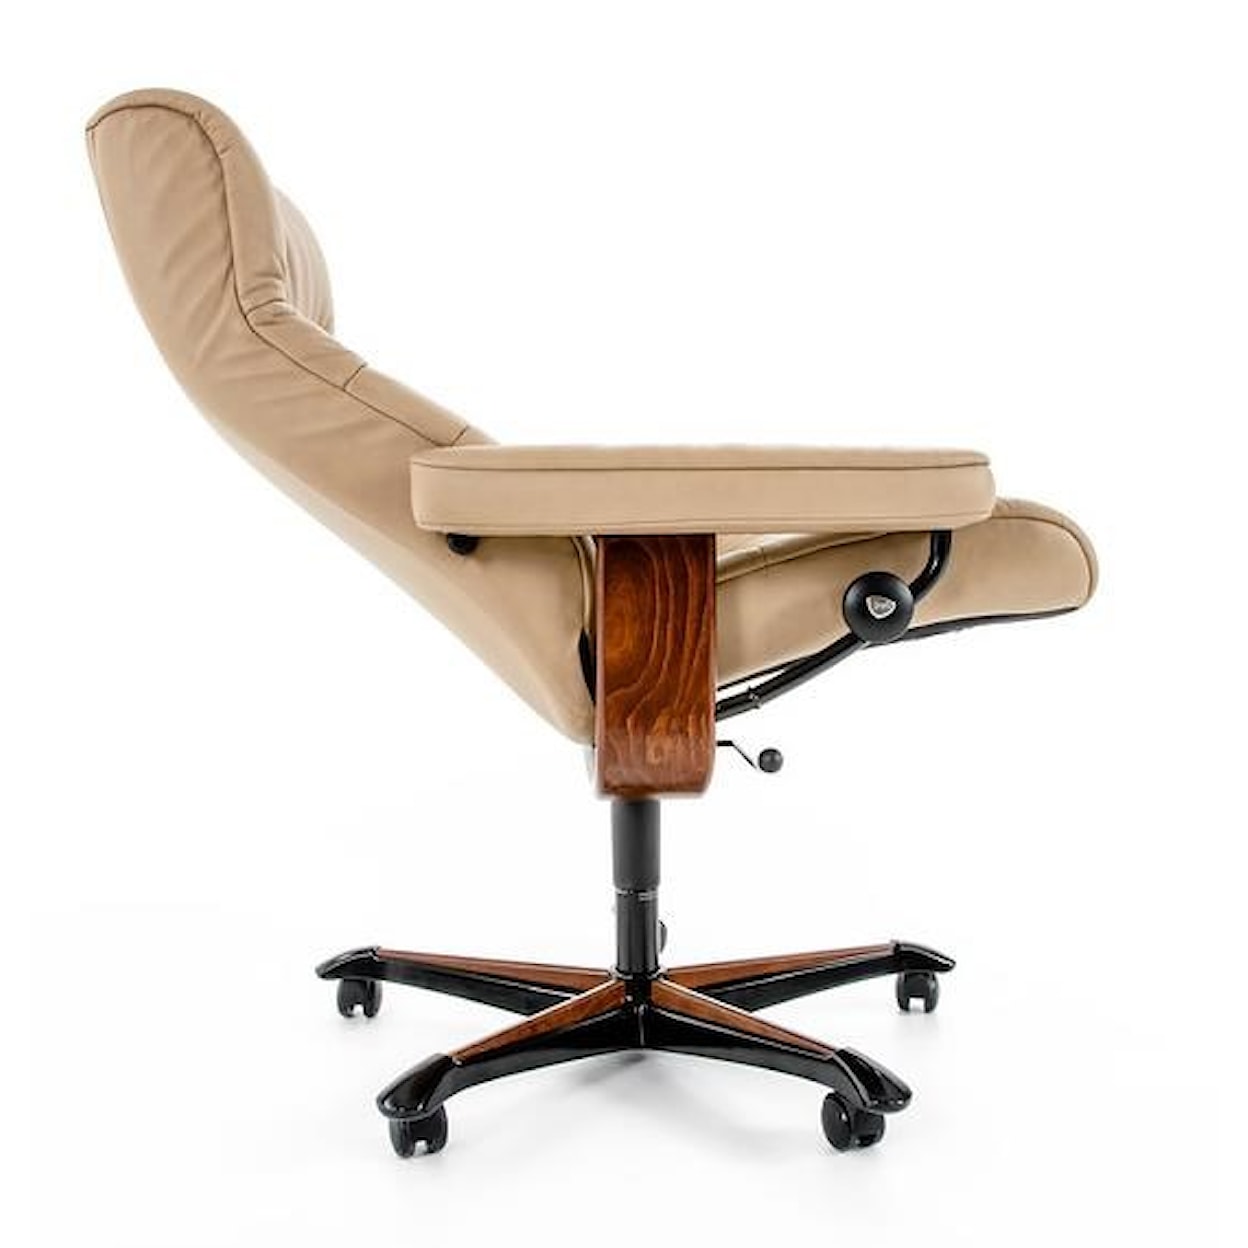 Stressless by Ekornes Home Office Opal Office Chair